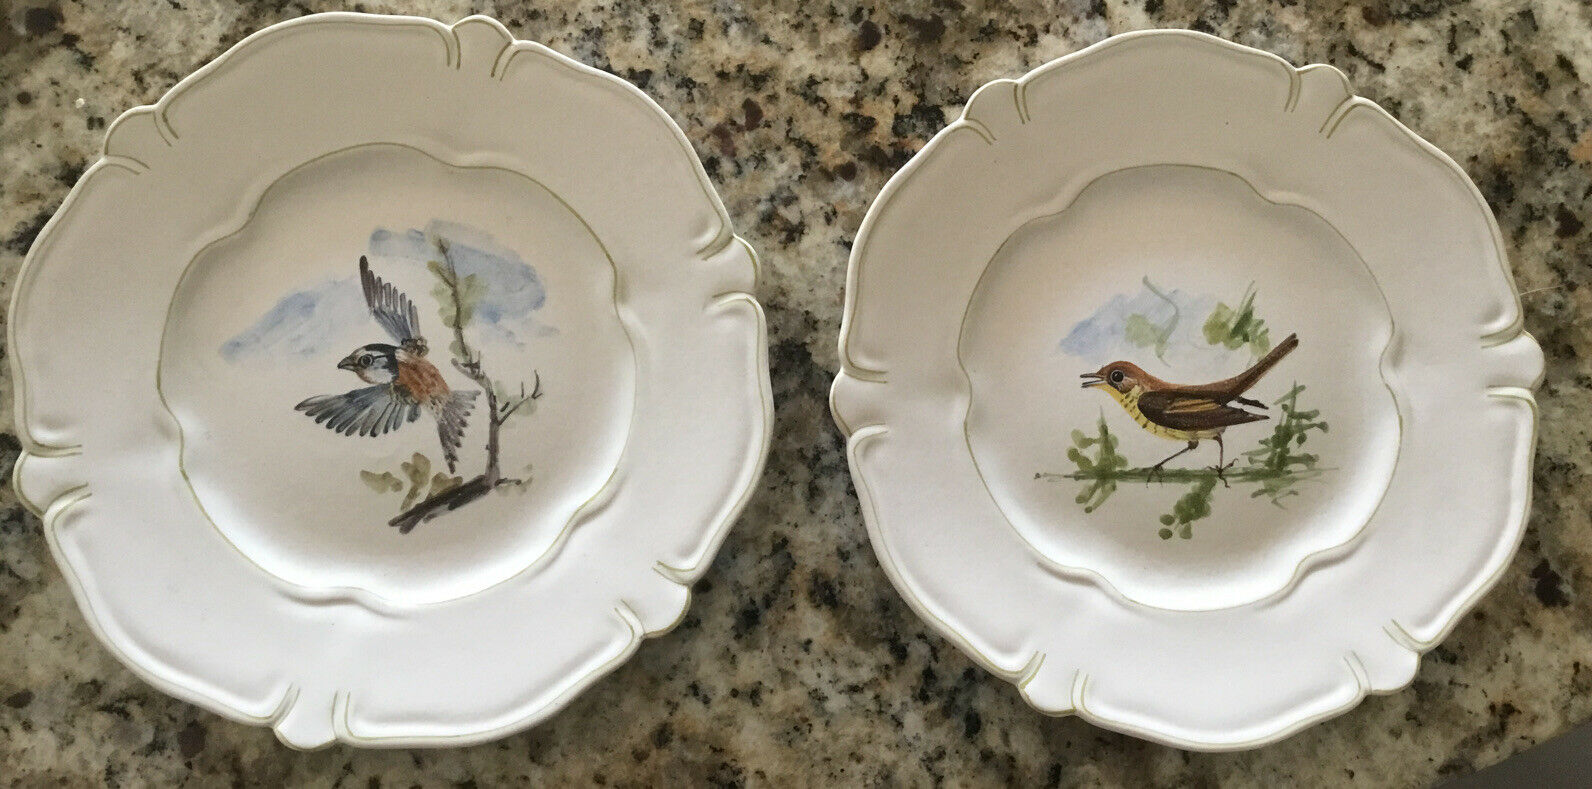 2 Guillot France Matte Hand Painted 7 3/4" Bird Plates Nightingale Goldfinch